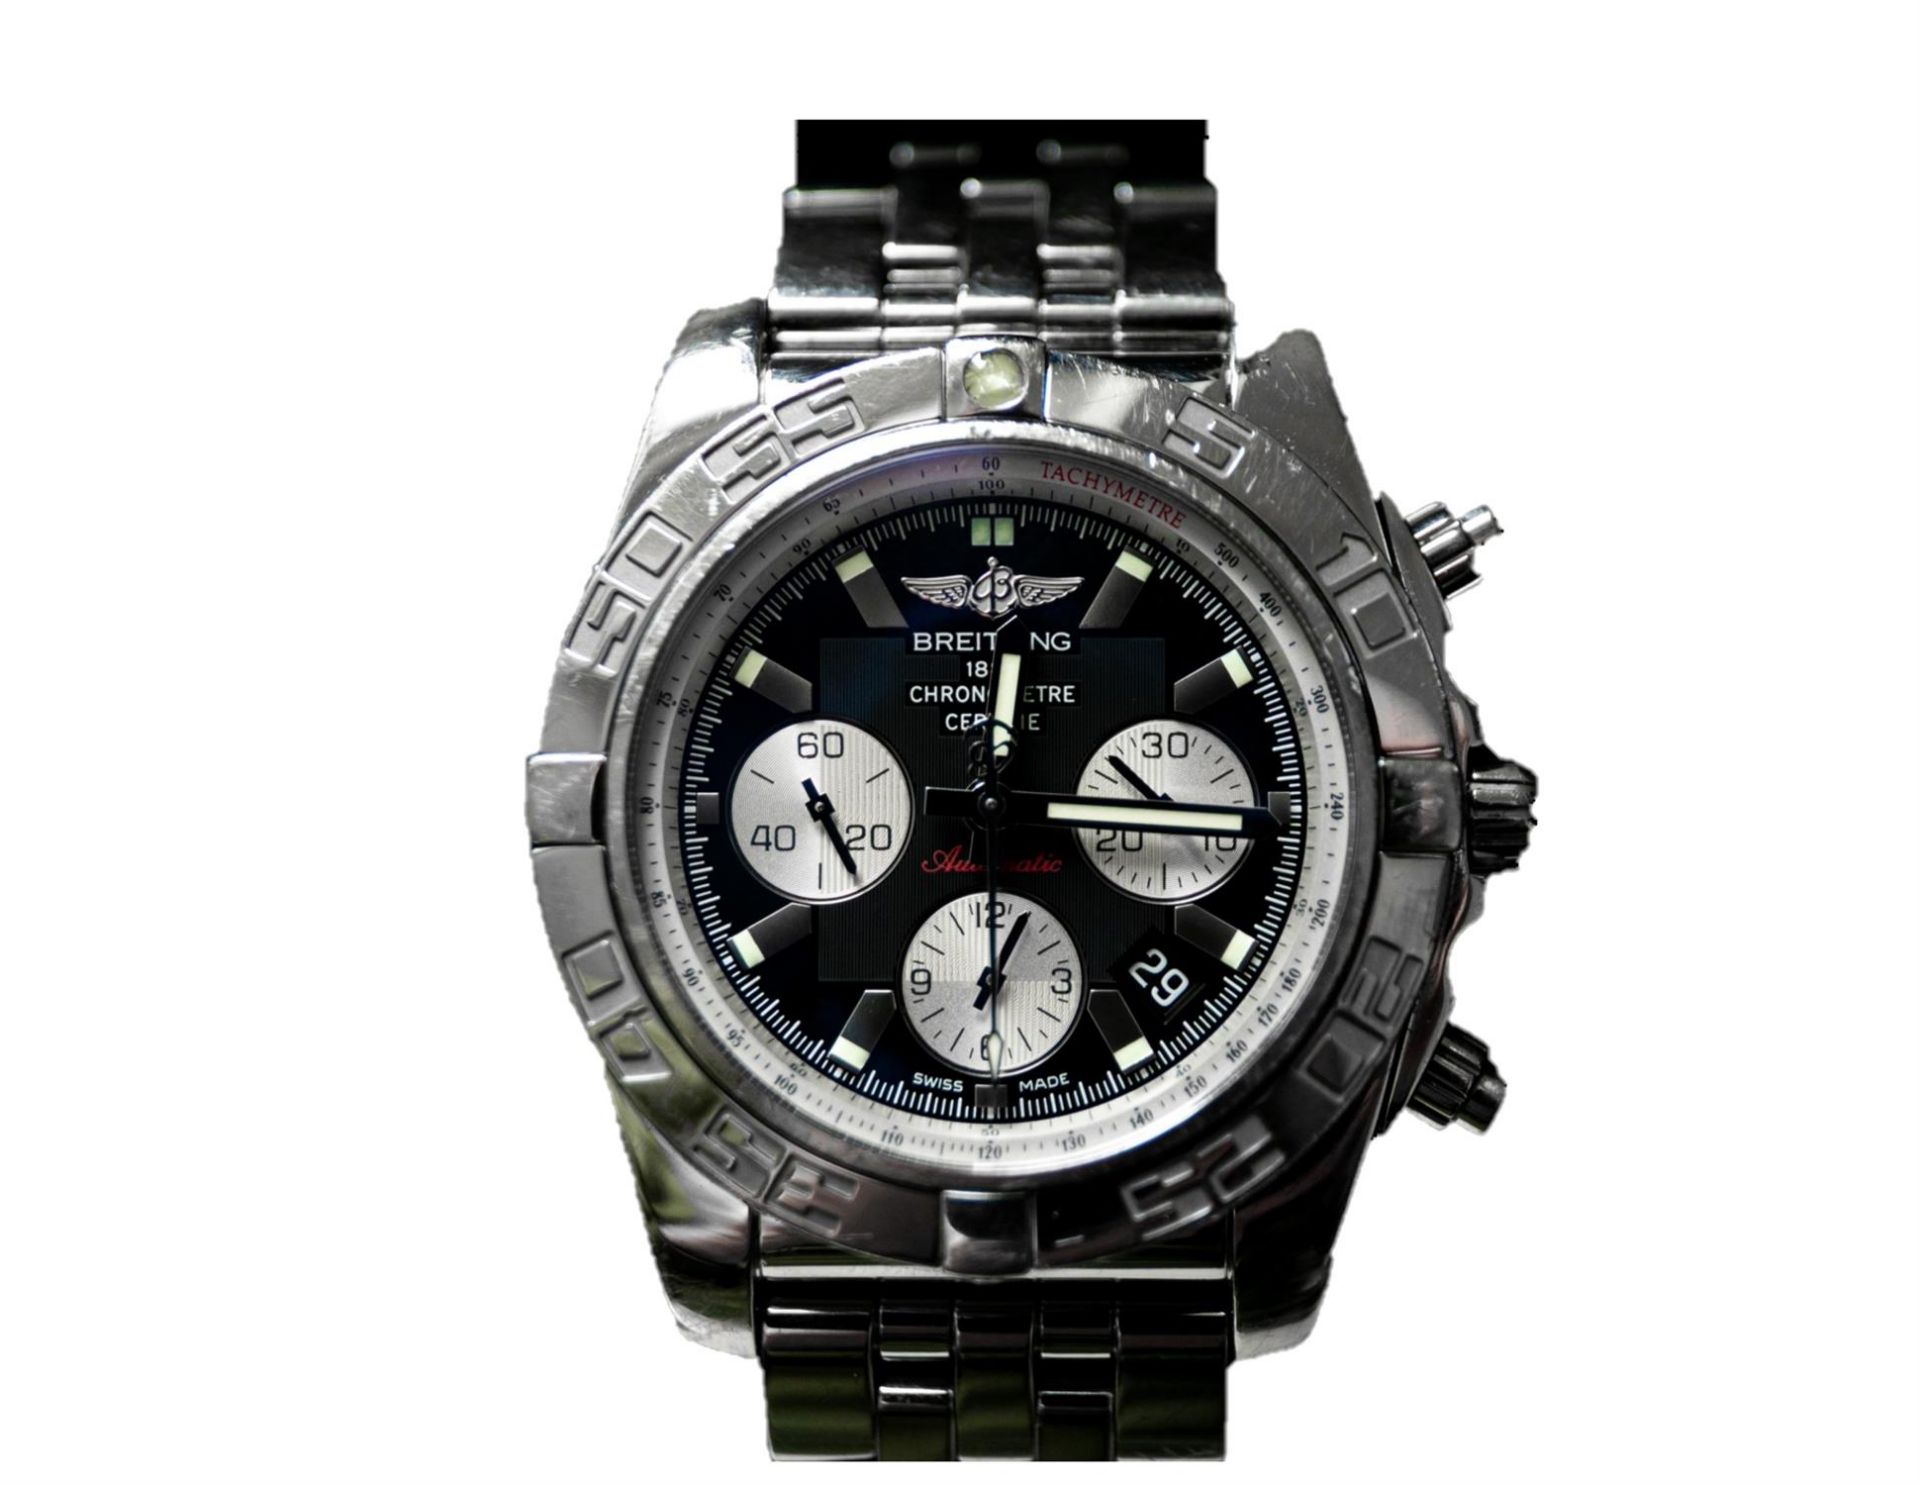 Breitling Chronomat 44 AB0110 Stainless Steel Watch